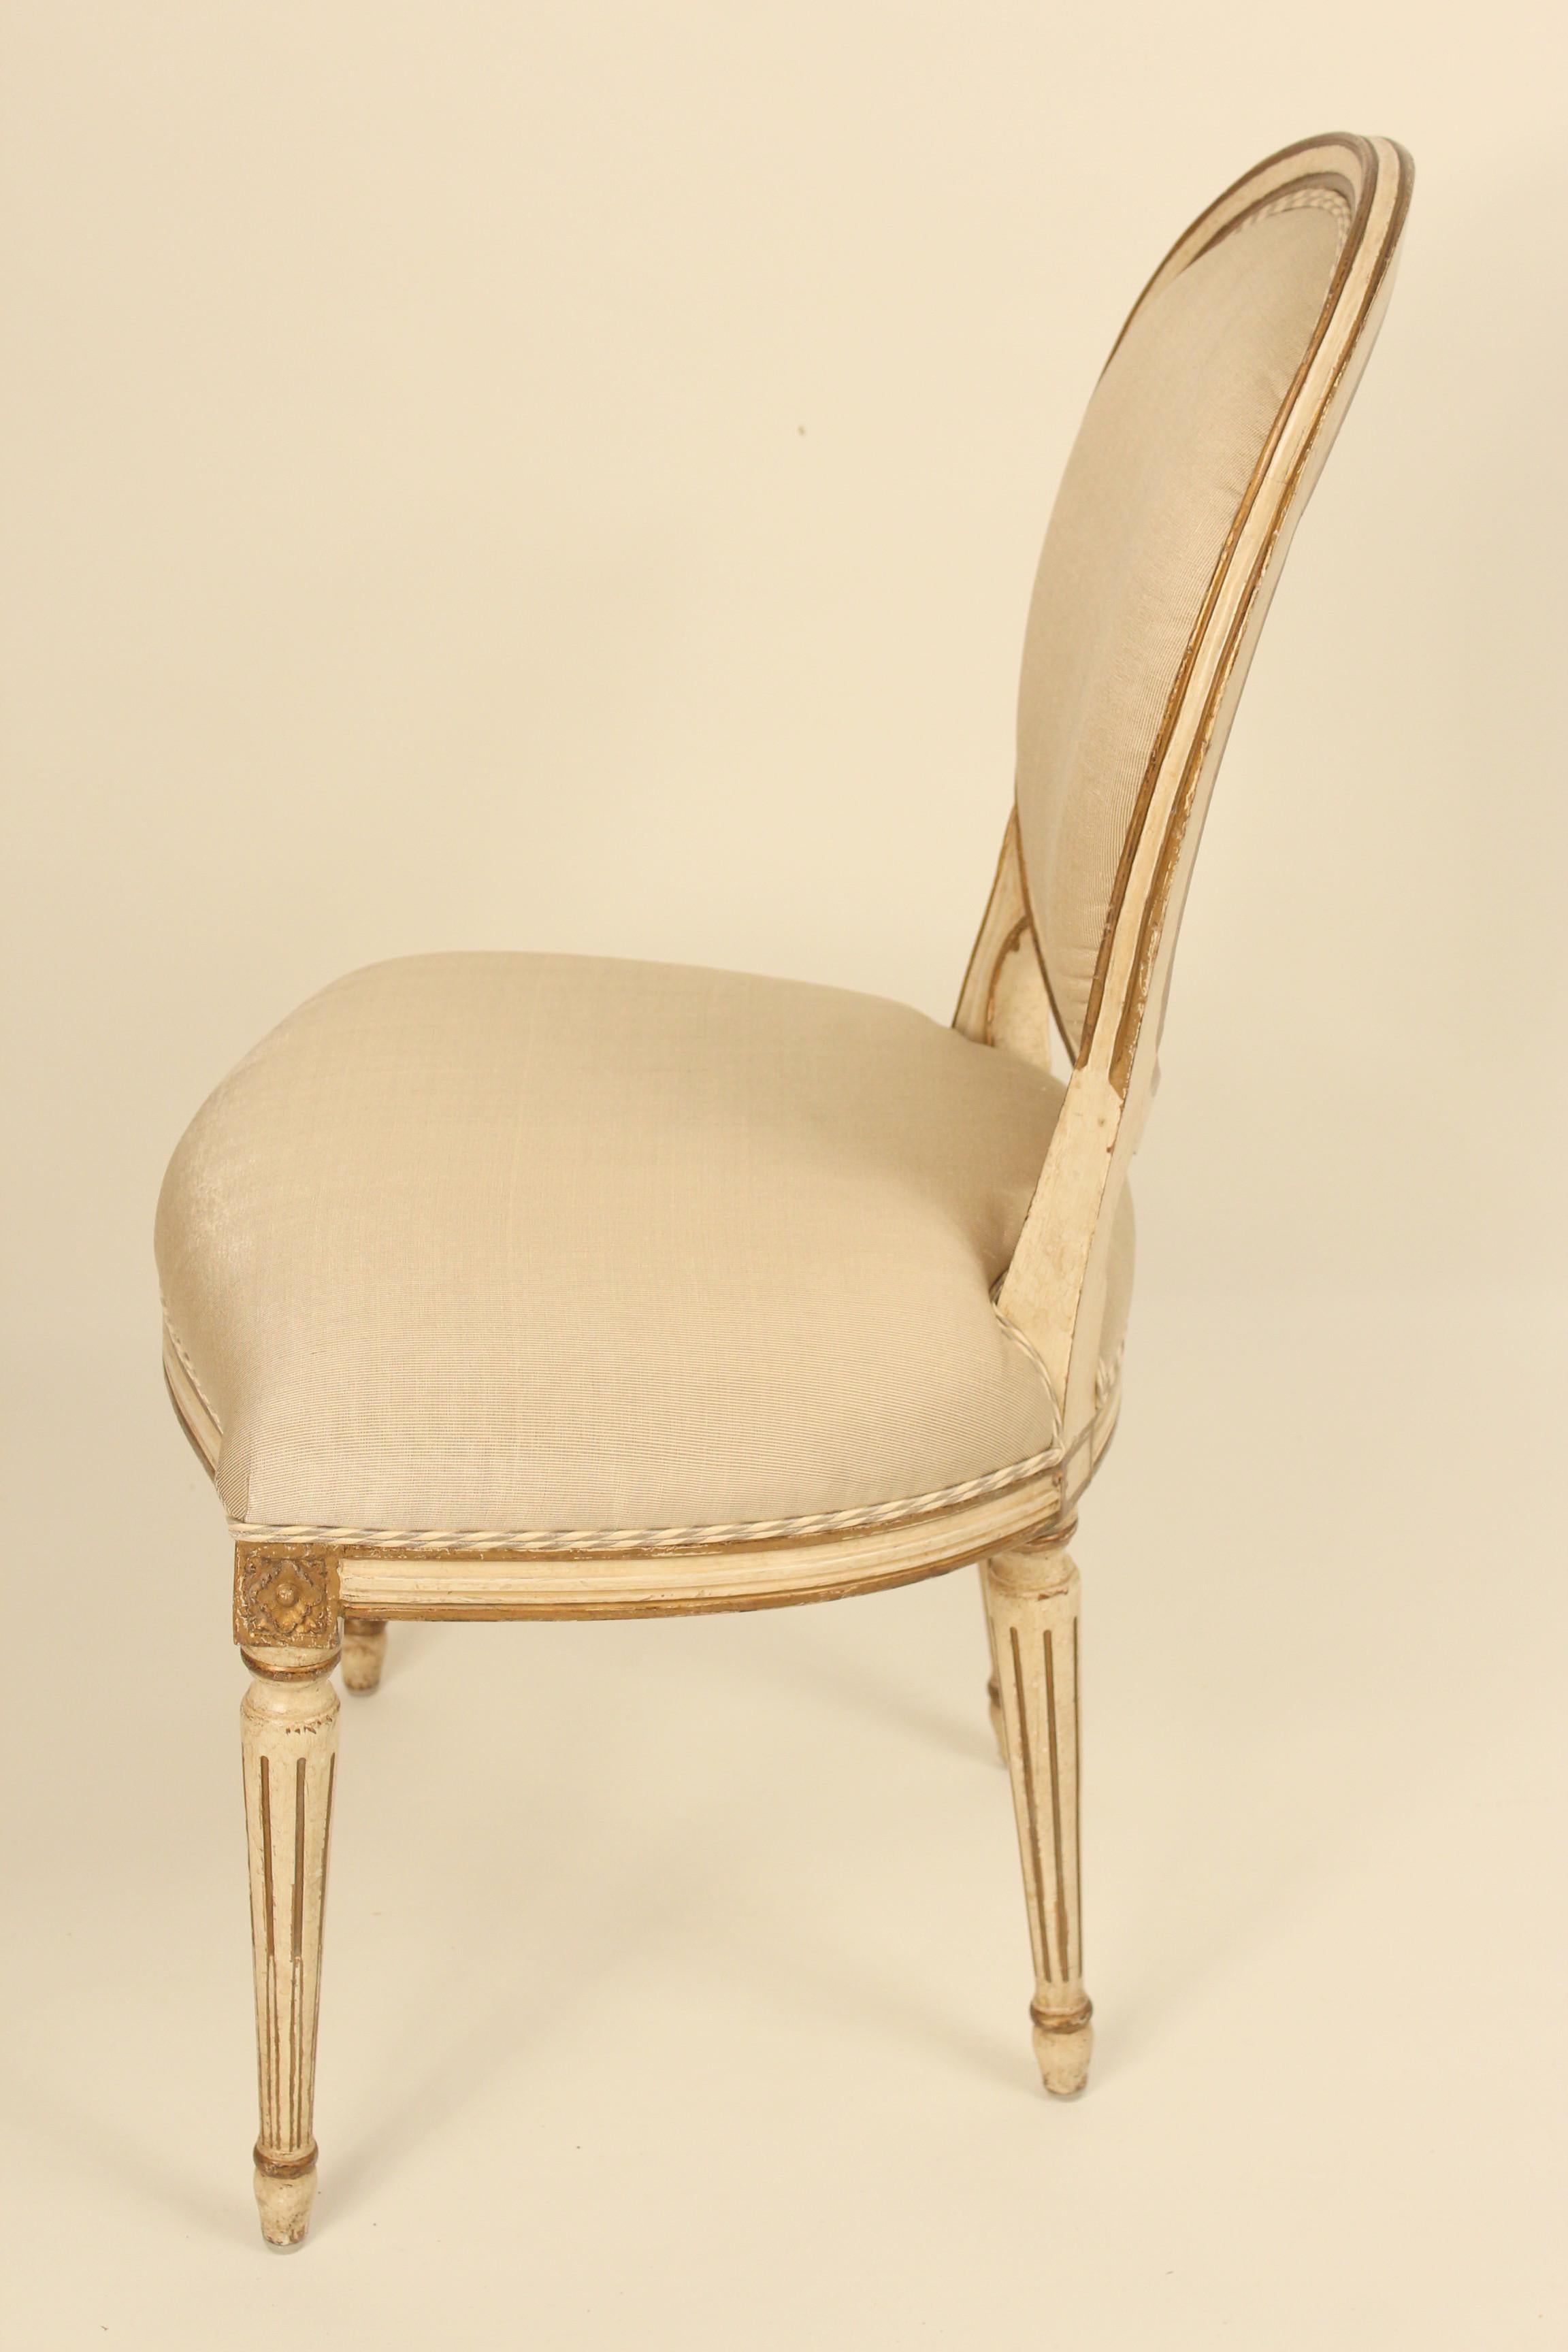 20th Century Set of 6 Painted and Gilt Louis XVI Style Dining Chairs